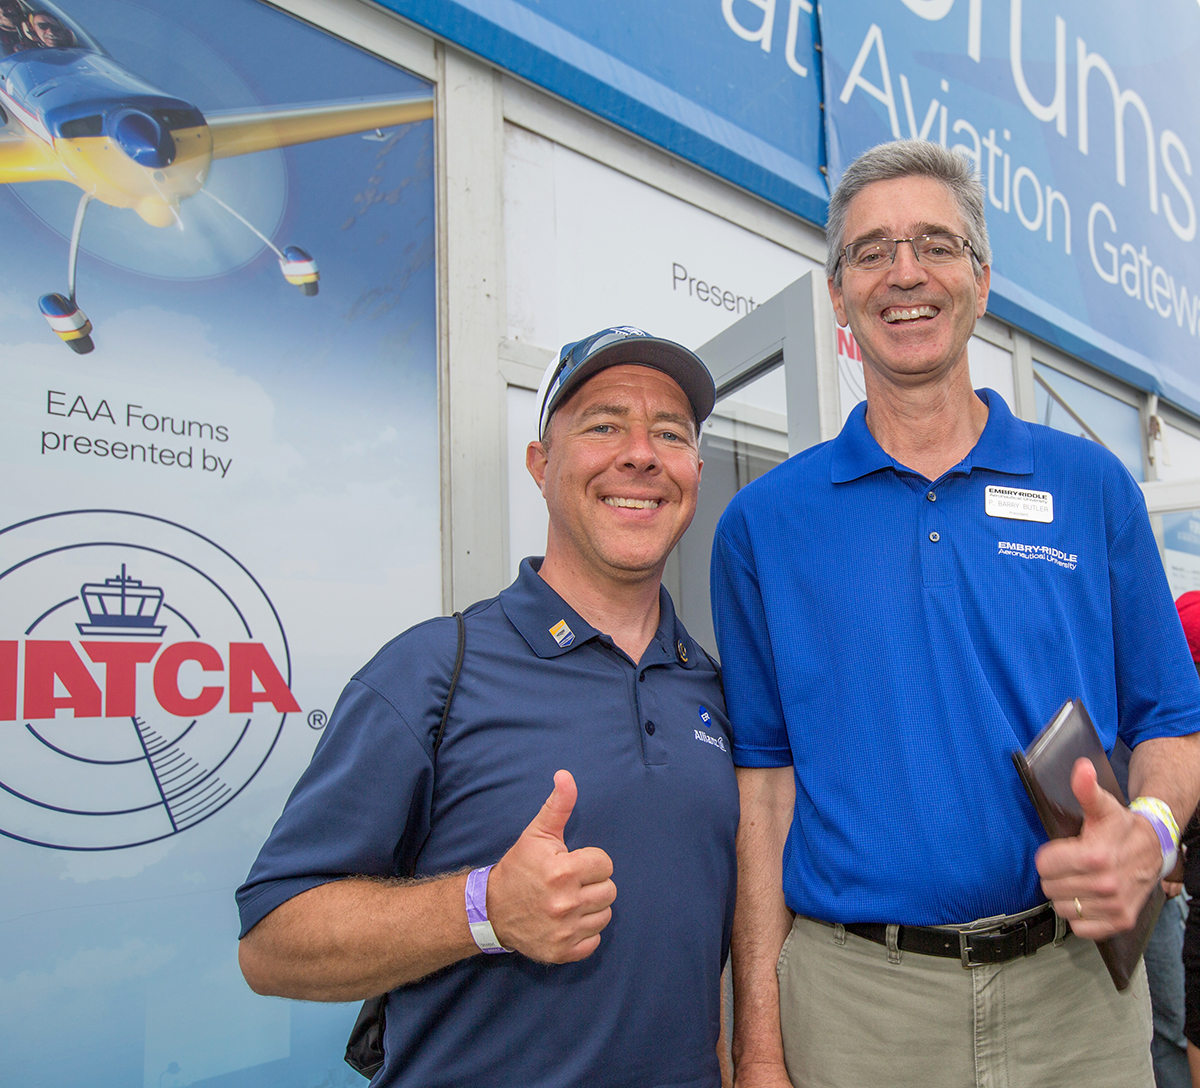 Dr. P. Barry Butler stands for a picture with an alum during the Embry-Riddle Alumni BBQ on day three of EAA Airventure in Oshkosh, WI, July 26, 2017. (Embry-Riddle/David Massey)